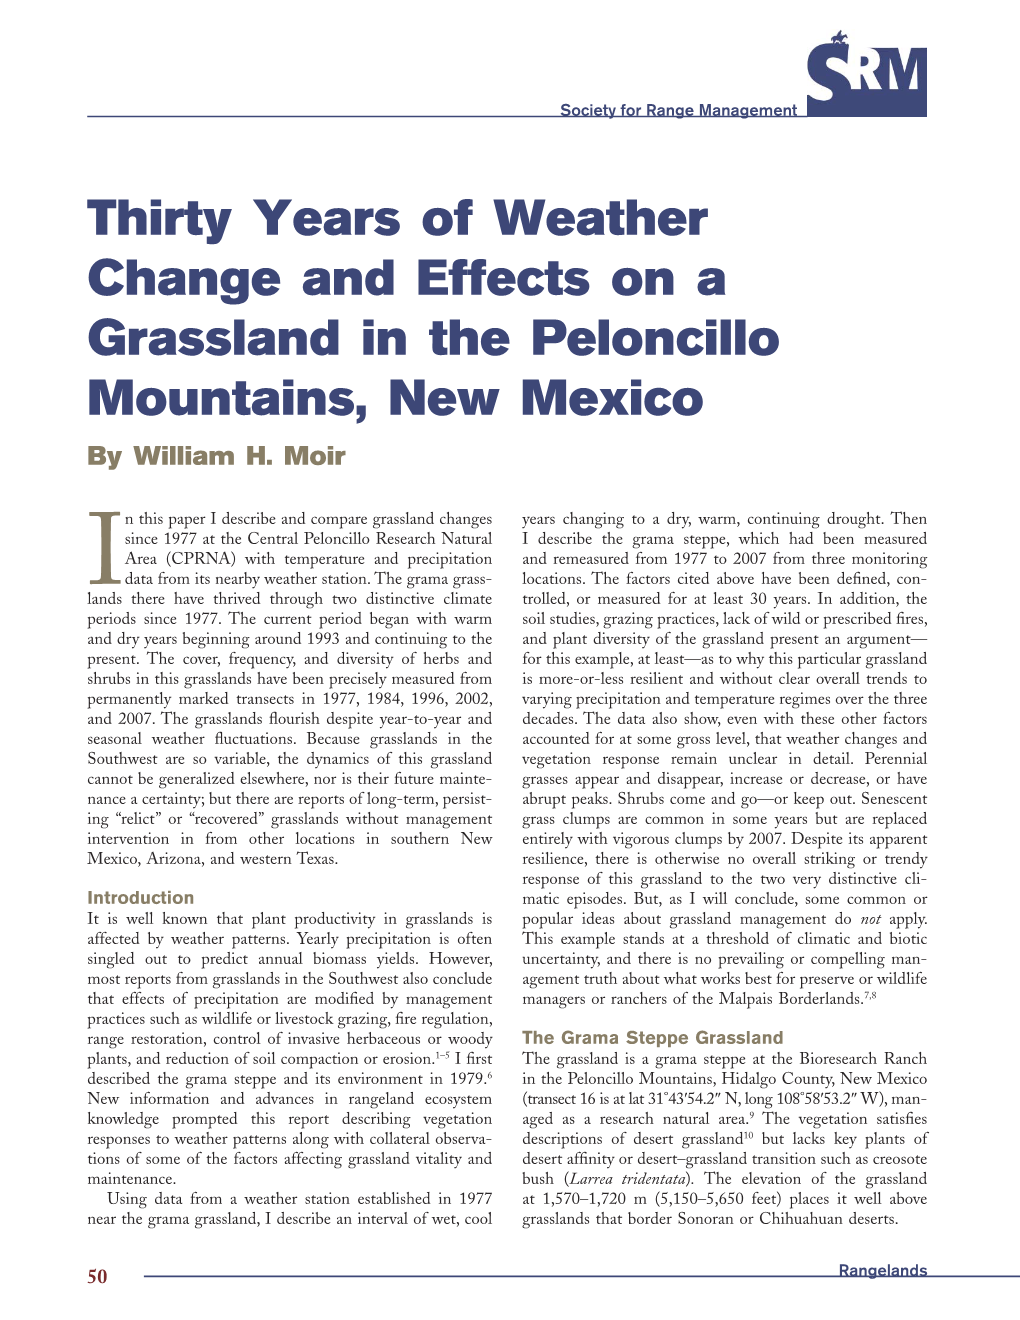 Thirty Years of Weather Change and Effects on a Grassland in the Peloncillo Mountains, New Mexico by William H